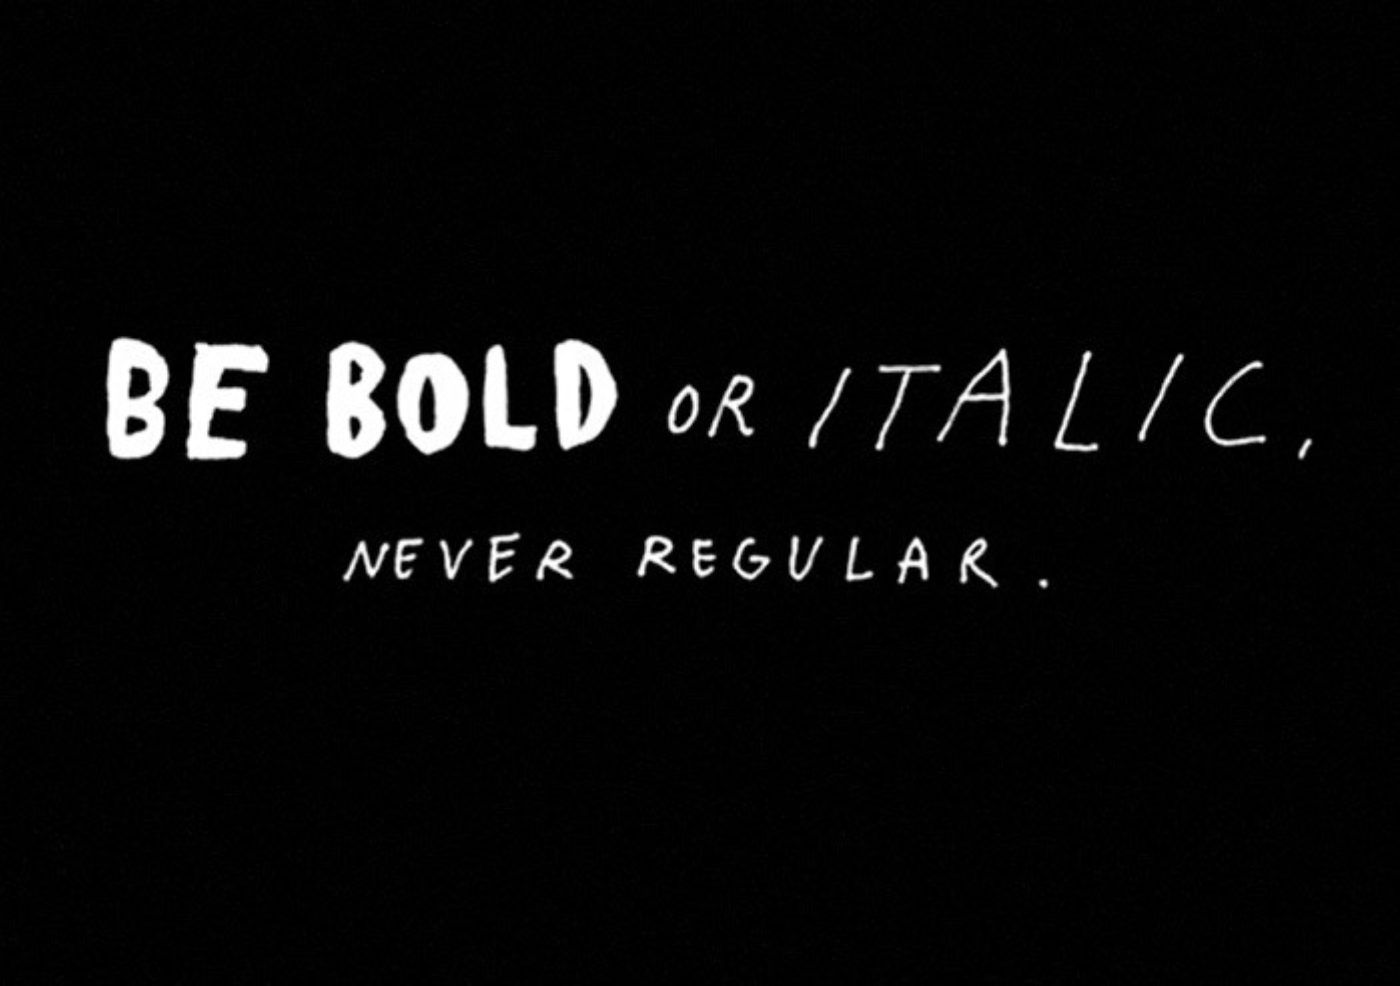 be bold typeface